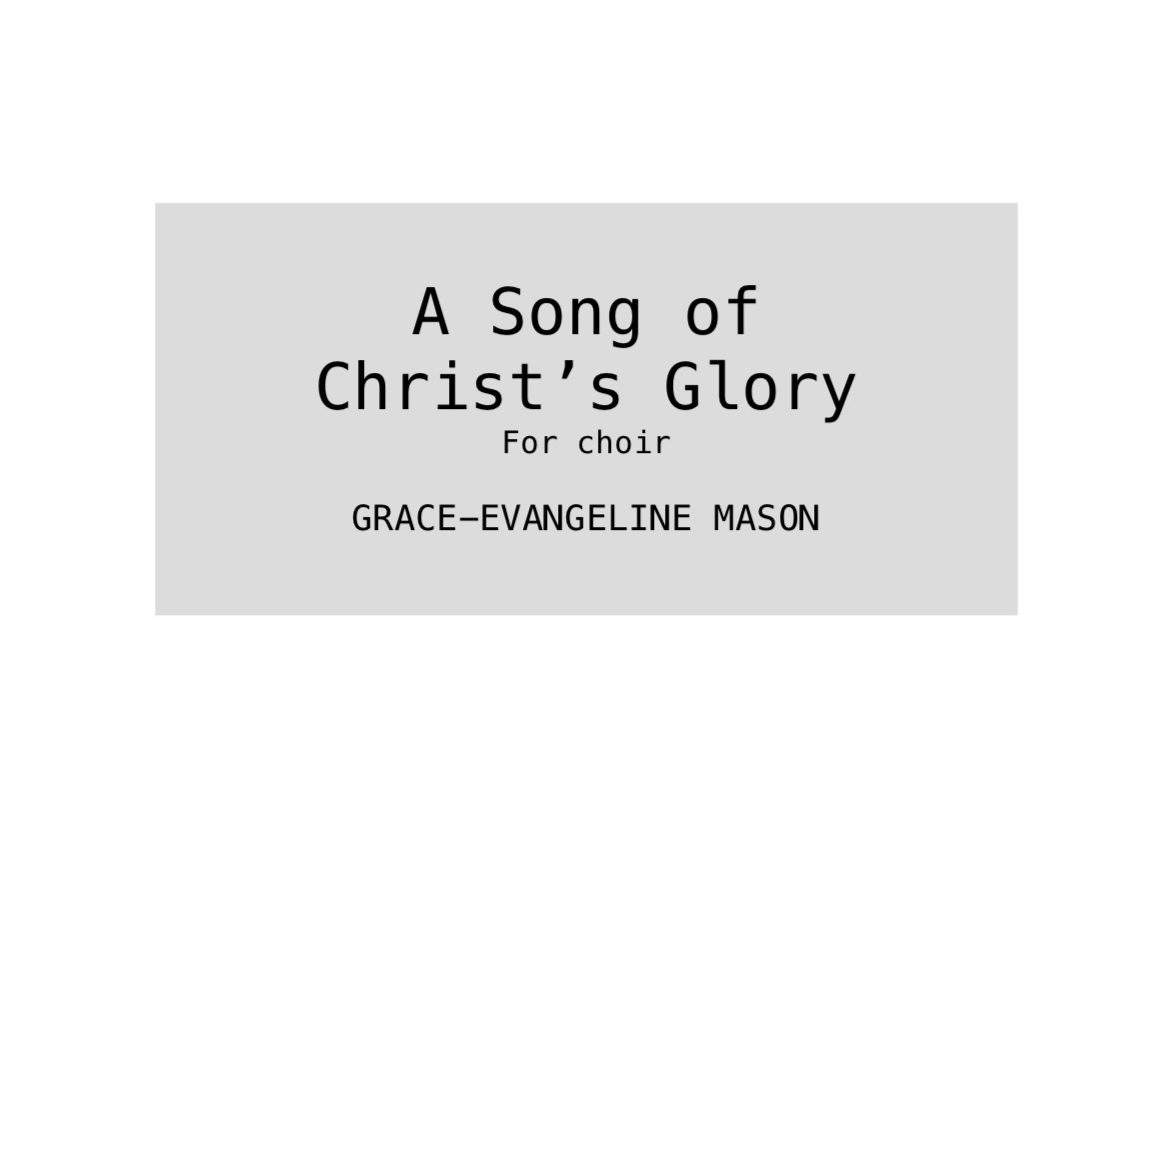 A Song of Christ's Glory (2019)